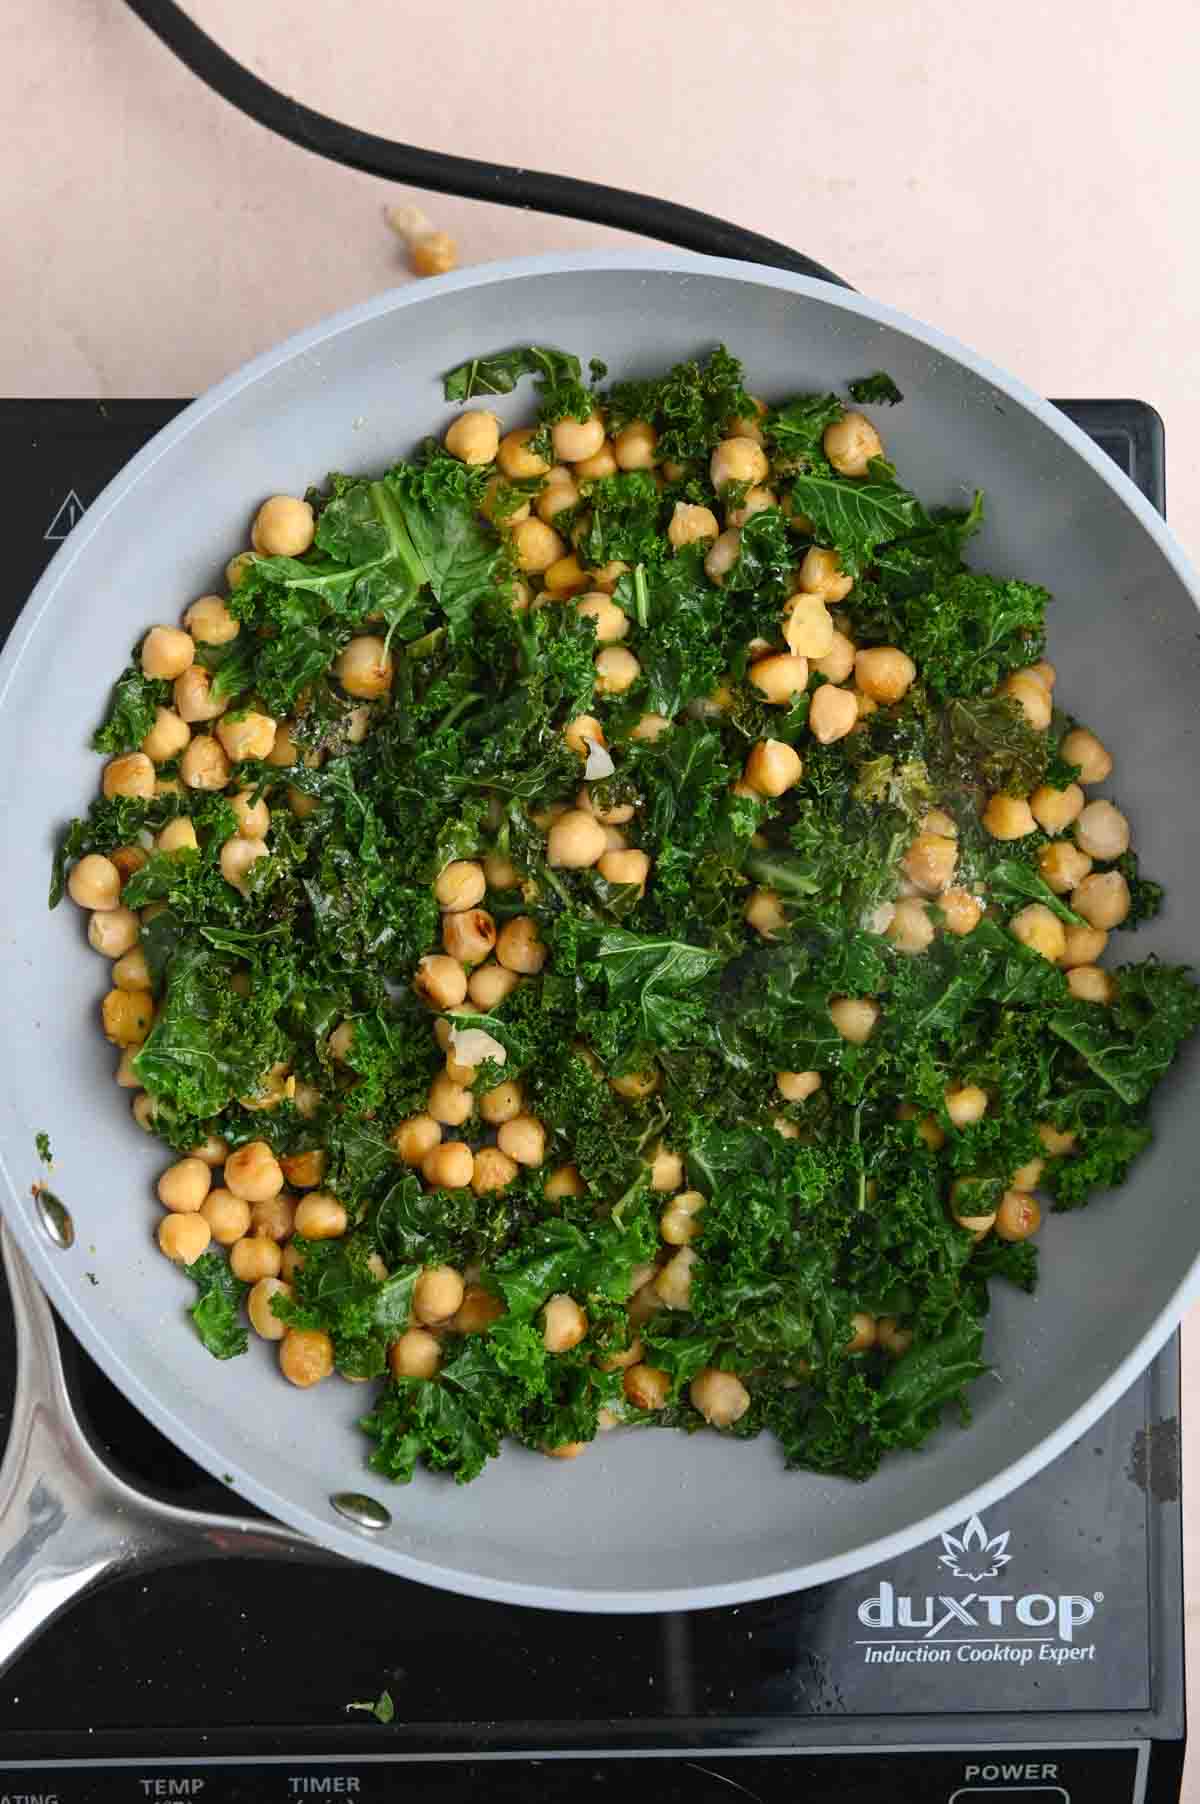 Wilted green kale with chickpeas in a gray skillet.